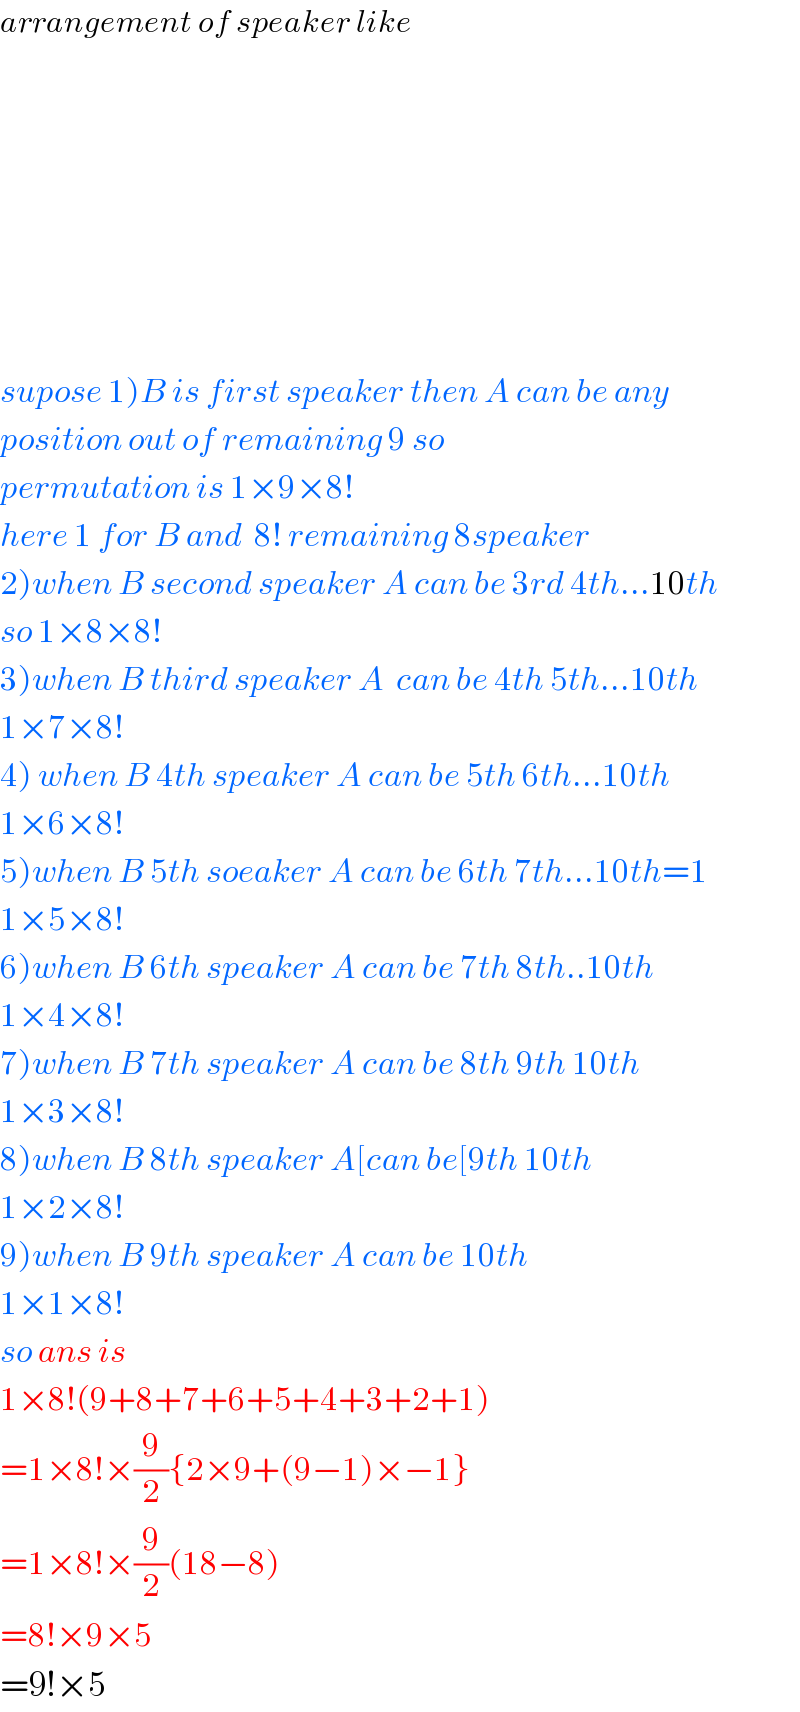 arrangement of speaker like                supose 1)B is first speaker then A can be any  position out of remaining 9 so  permutation is 1×9×8!  here 1 for B and  8! remaining 8speaker  2)when B second speaker A can be 3rd 4th...10th  so 1×8×8!  3)when B third speaker A  can be 4th 5th...10th  1×7×8!  4) when B 4th speaker A can be 5th 6th...10th  1×6×8!  5)when B 5th soeaker A can be 6th 7th...10th=1  1×5×8!  6)when B 6th speaker A can be 7th 8th..10th  1×4×8!  7)when B 7th speaker A can be 8th 9th 10th  1×3×8!  8)when B 8th speaker A[can be[9th 10th  1×2×8!  9)when B 9th speaker A can be 10th  1×1×8!  so ans is   1×8!(9+8+7+6+5+4+3+2+1)  =1×8!×(9/2){2×9+(9−1)×−1}  =1×8!×(9/2)(18−8)  =8!×9×5  =9!×5  